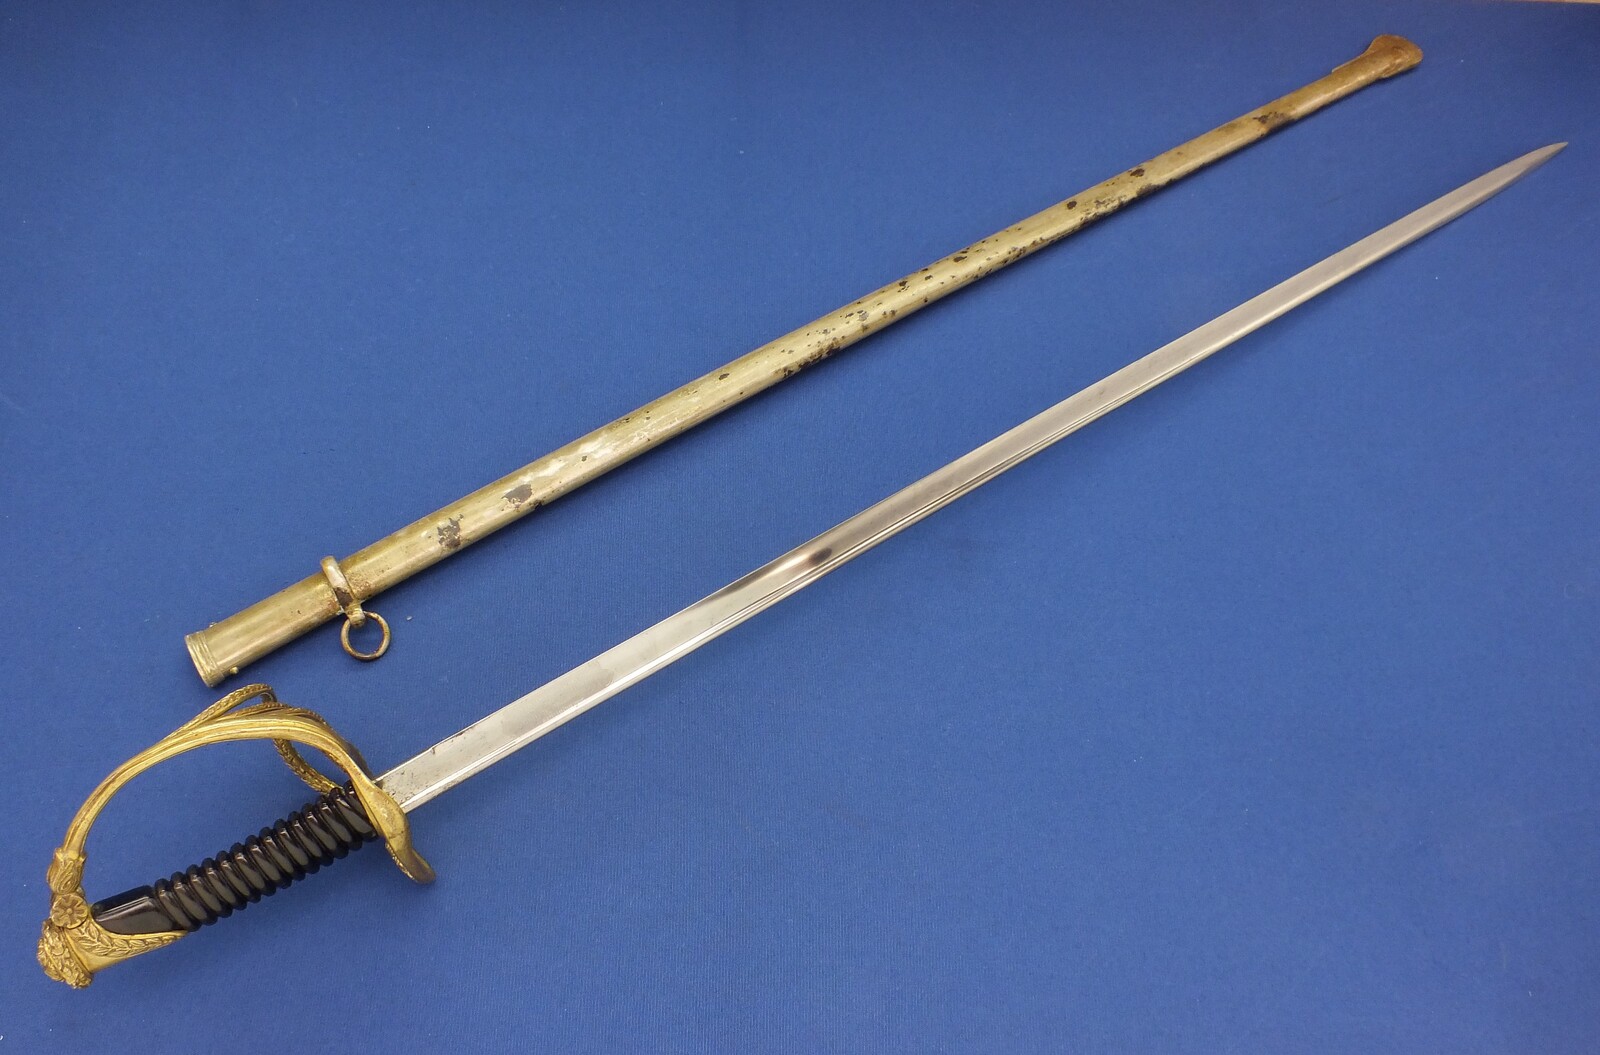 A very nice antique Belgian Officers Sword Model 1889 signed Auguste Fonson Bruxelles, total length 112 cm, in very good condition. Price 475 euro